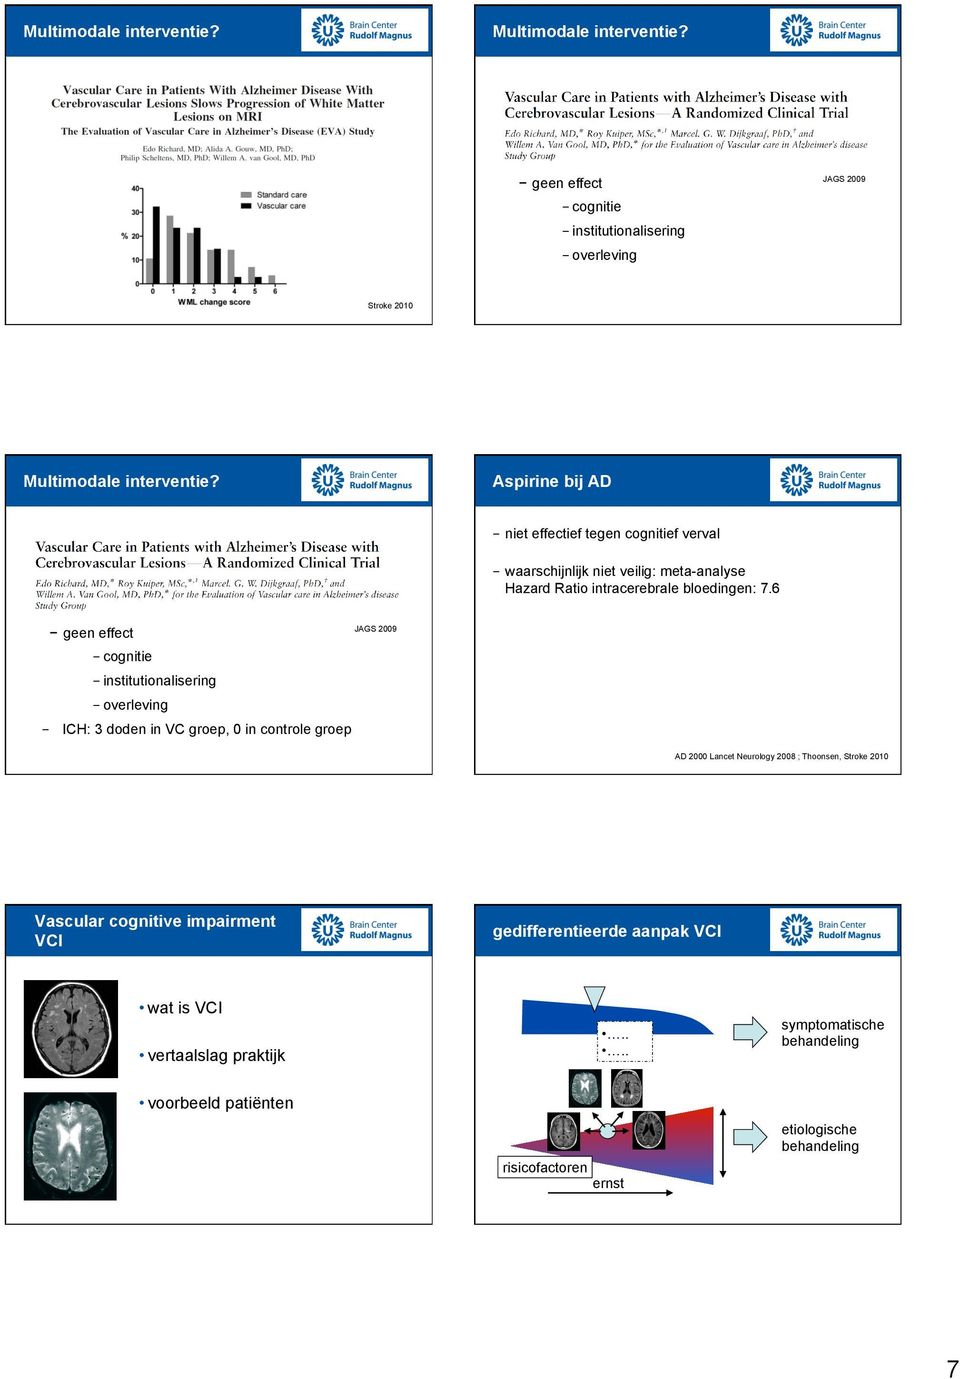 6 JAGS 2009 geen effect - cognitie - institutionalisering - overleving - ICH: 3 doden in VC groep, 0 in controle groep AD 2000 Lancet Neurology 2008 ; Thoonsen,